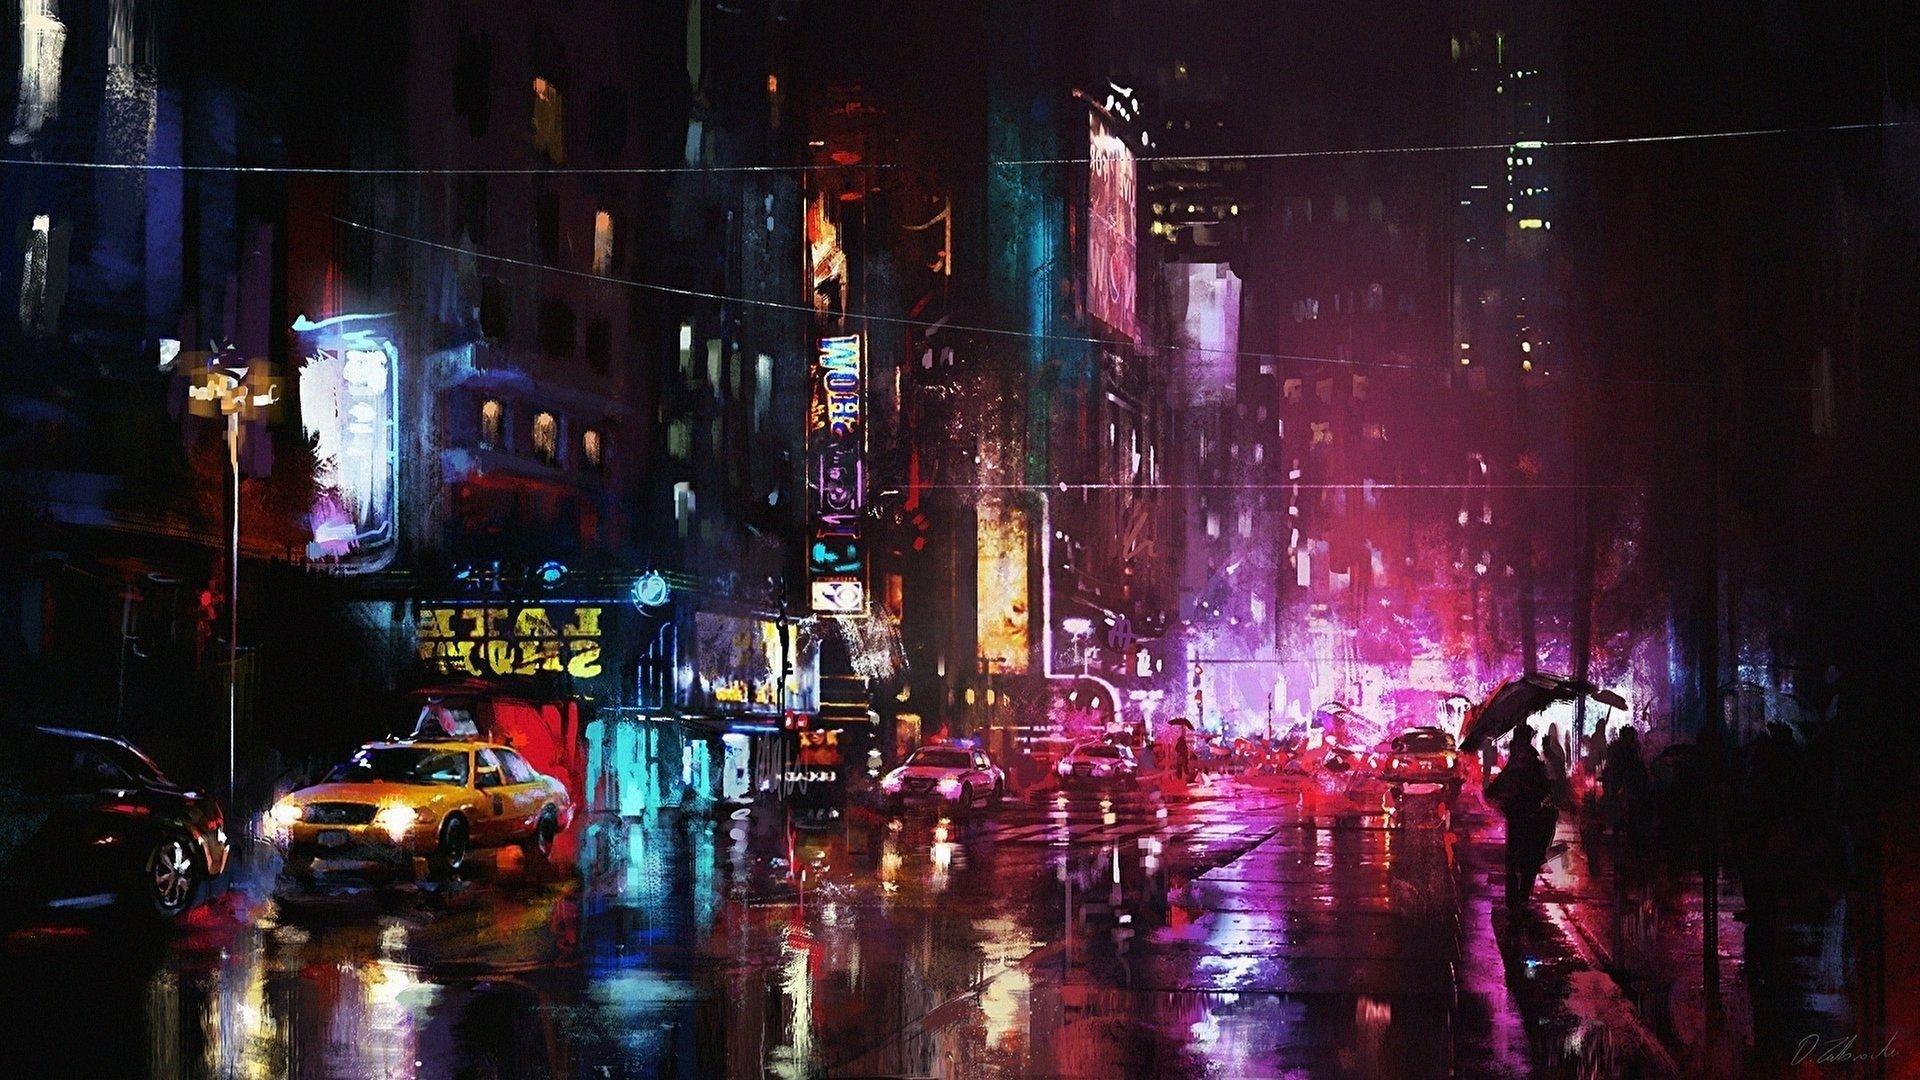 A painting of the city at night - City